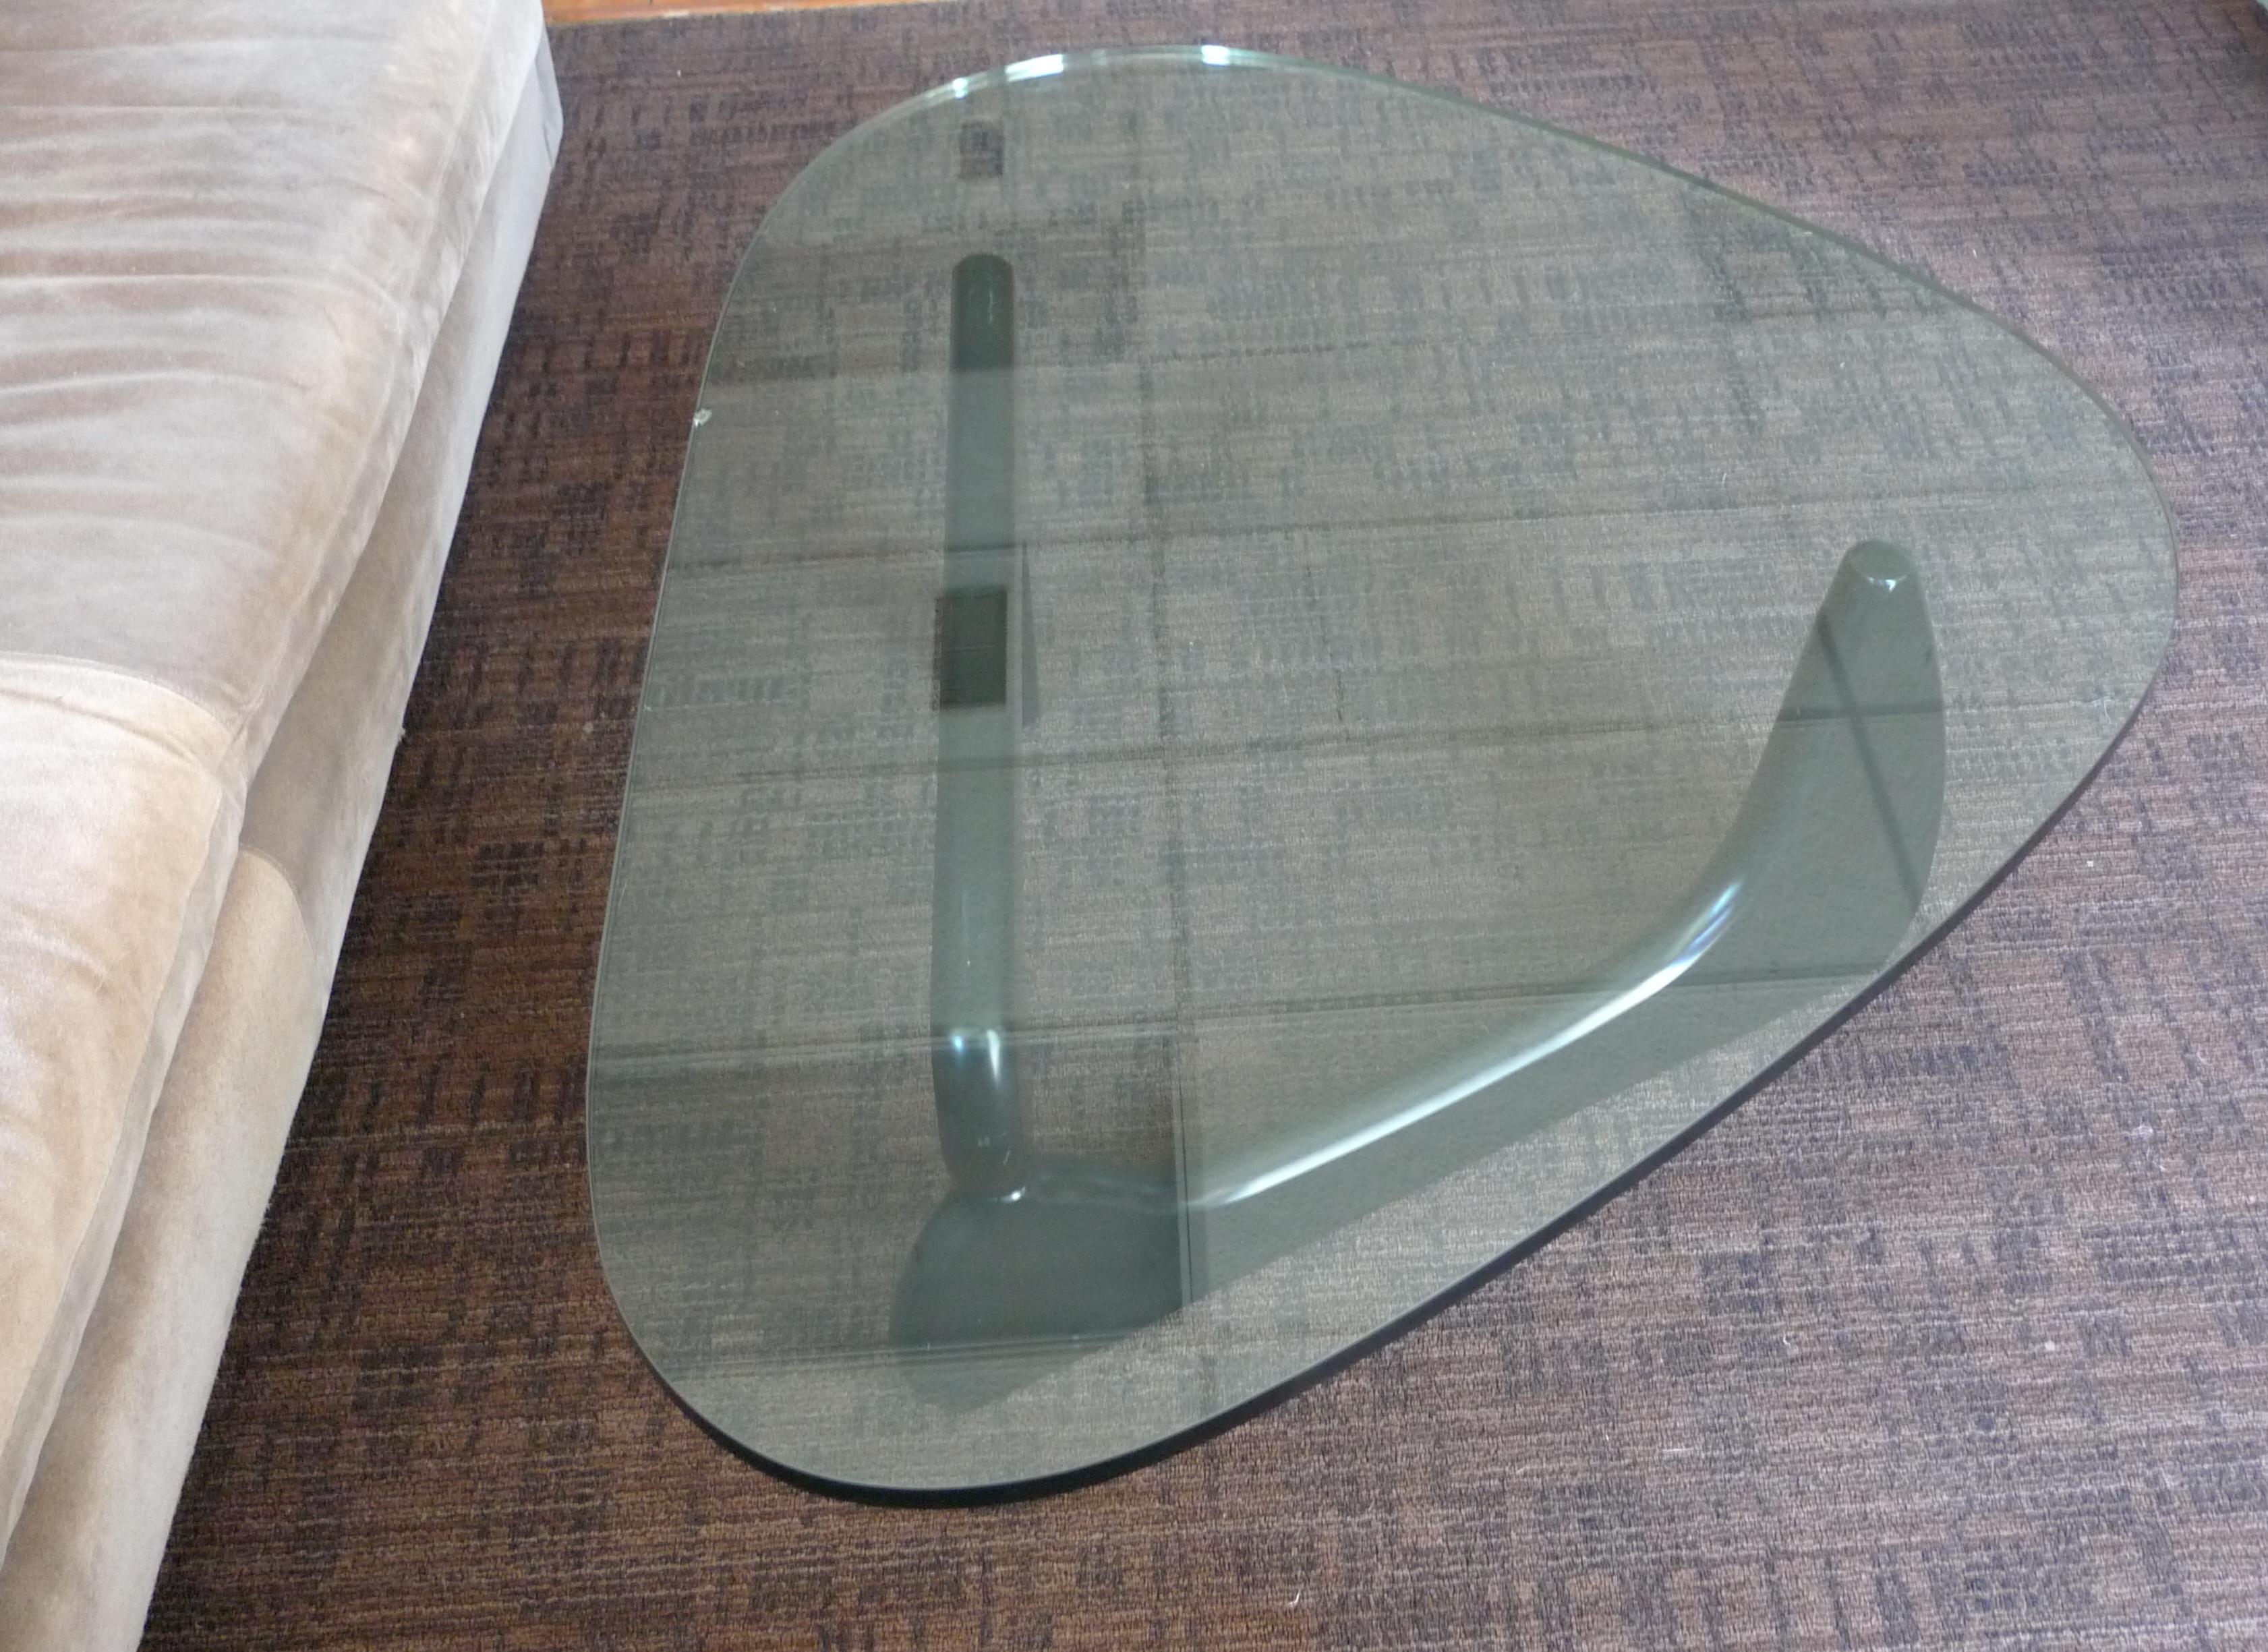 Coffee Table IN-50 Designed by Isamu Noguchi for Herman Miller, circa 1940s. An icon in the furniture world. The two curved, wooden shapes that comprise the base are mirror images inverted to provide support to the triangular glass top. The three